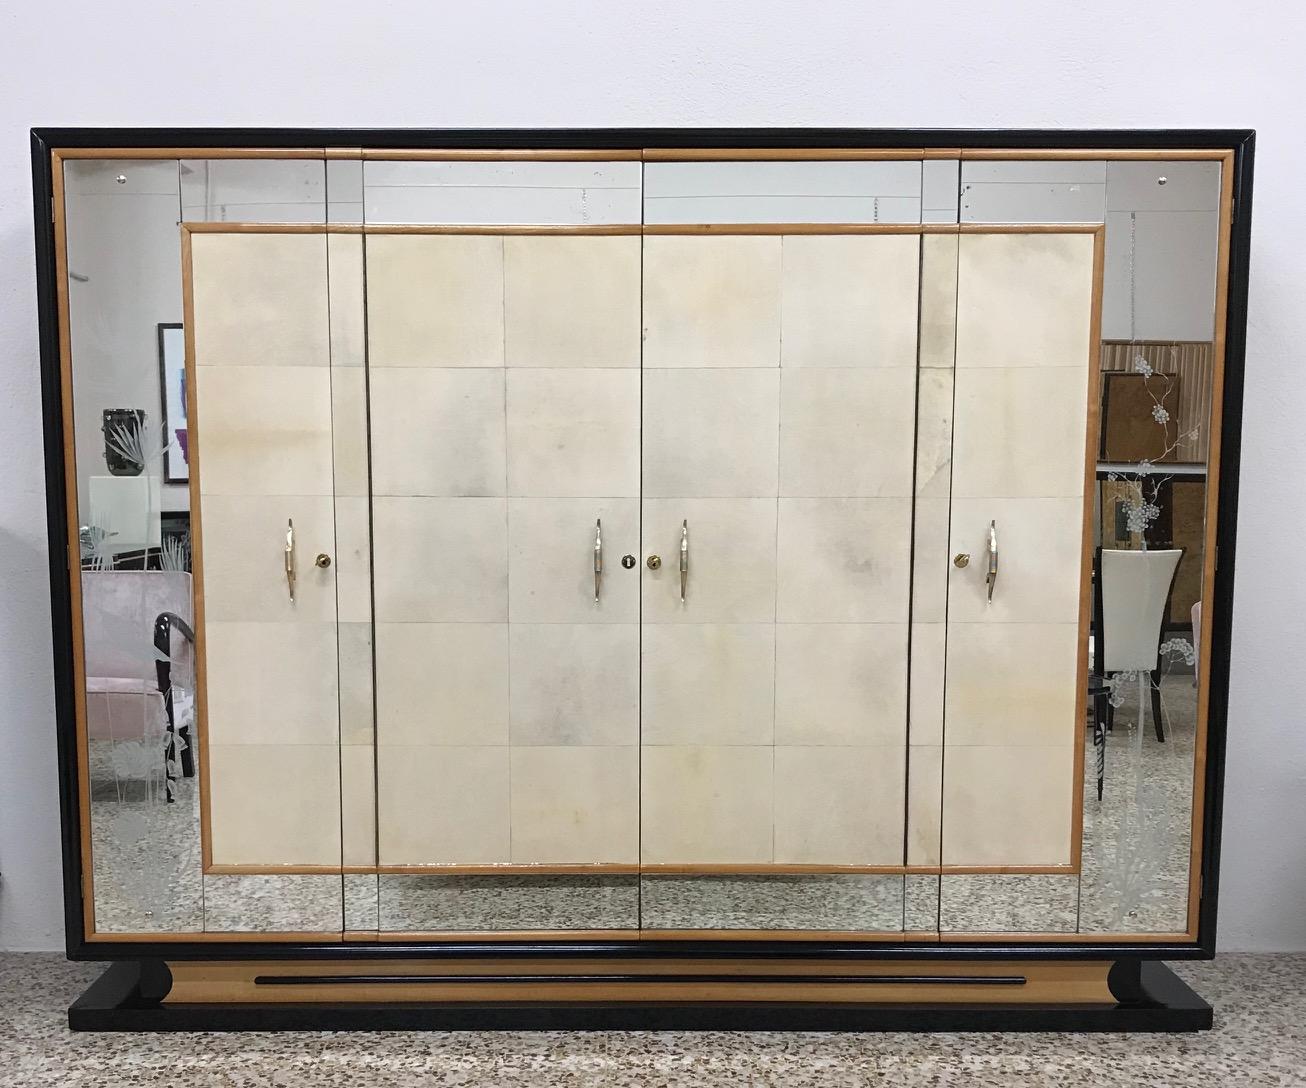 This Italian wardrobe was produced in the 1940s in the style of Osvaldo Borsani.
The front of the doors is covered with parchment with maple details while the structure is in black lacquered wood.
The original mirrors are sandblasted with elegant